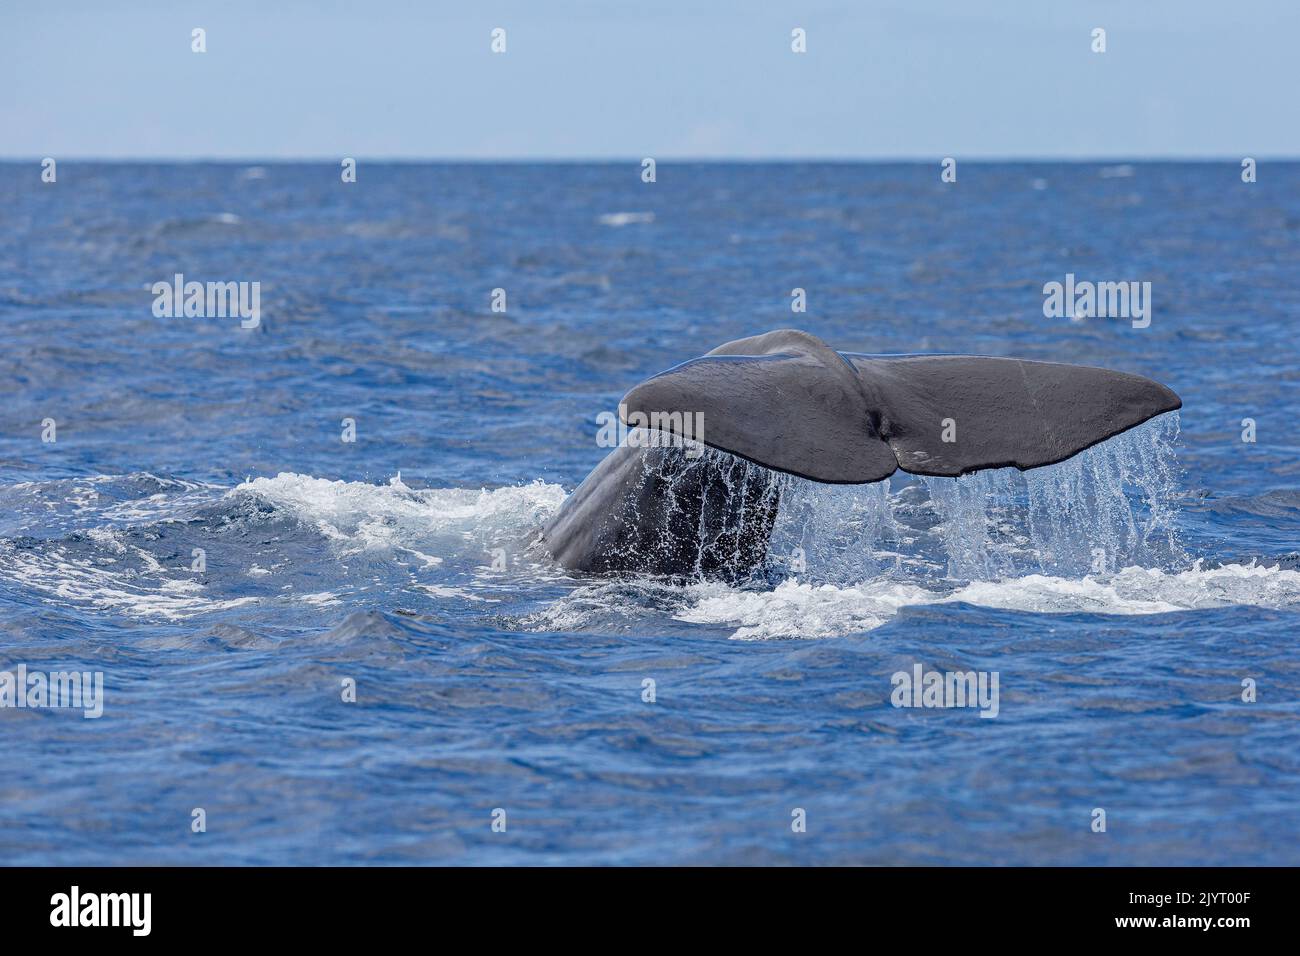 Tail of Sperm whale (Physeter macrocephalus). Vulnerable (IUCN). The sperm whale is the largest of the toothed whales. Sperm whales are known to dive as deep as 1,000 meters in search of squid to eat. Azores, Portugal, Atlantic Ocean. Stock Photo